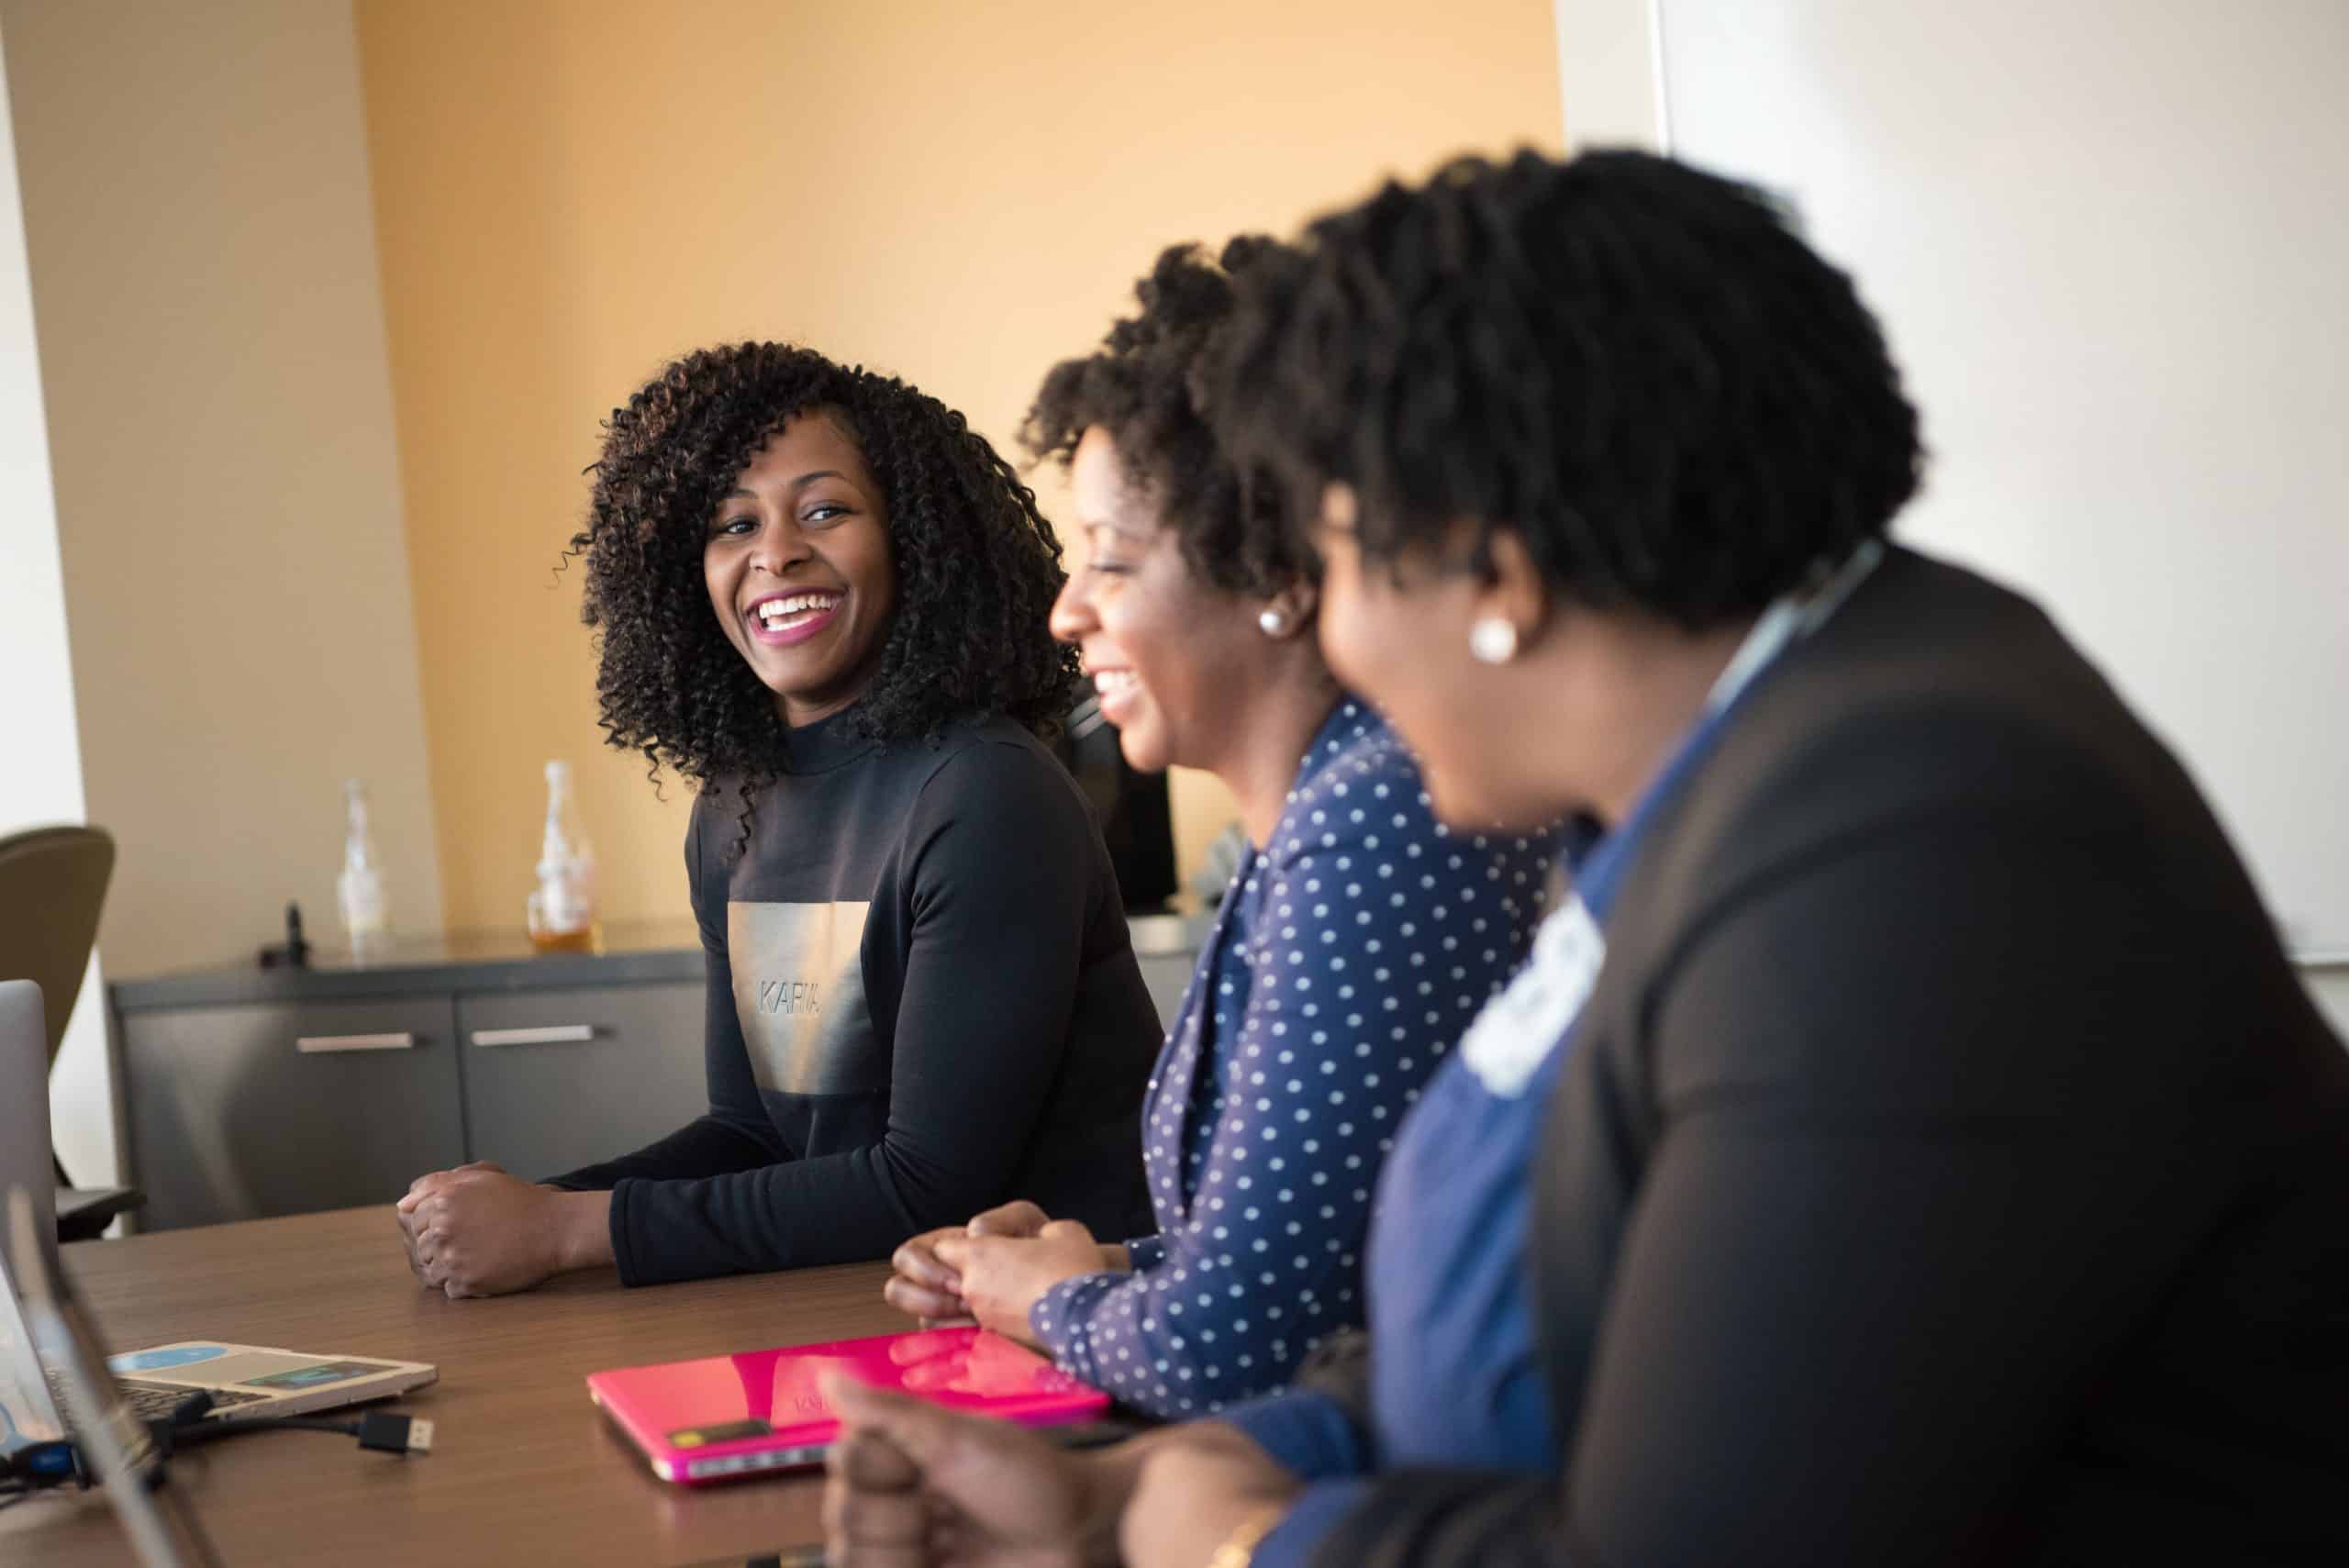 Photo of three feminine-presenting people of color smiling and talking at a table in an office space. They are in business casual clothing.